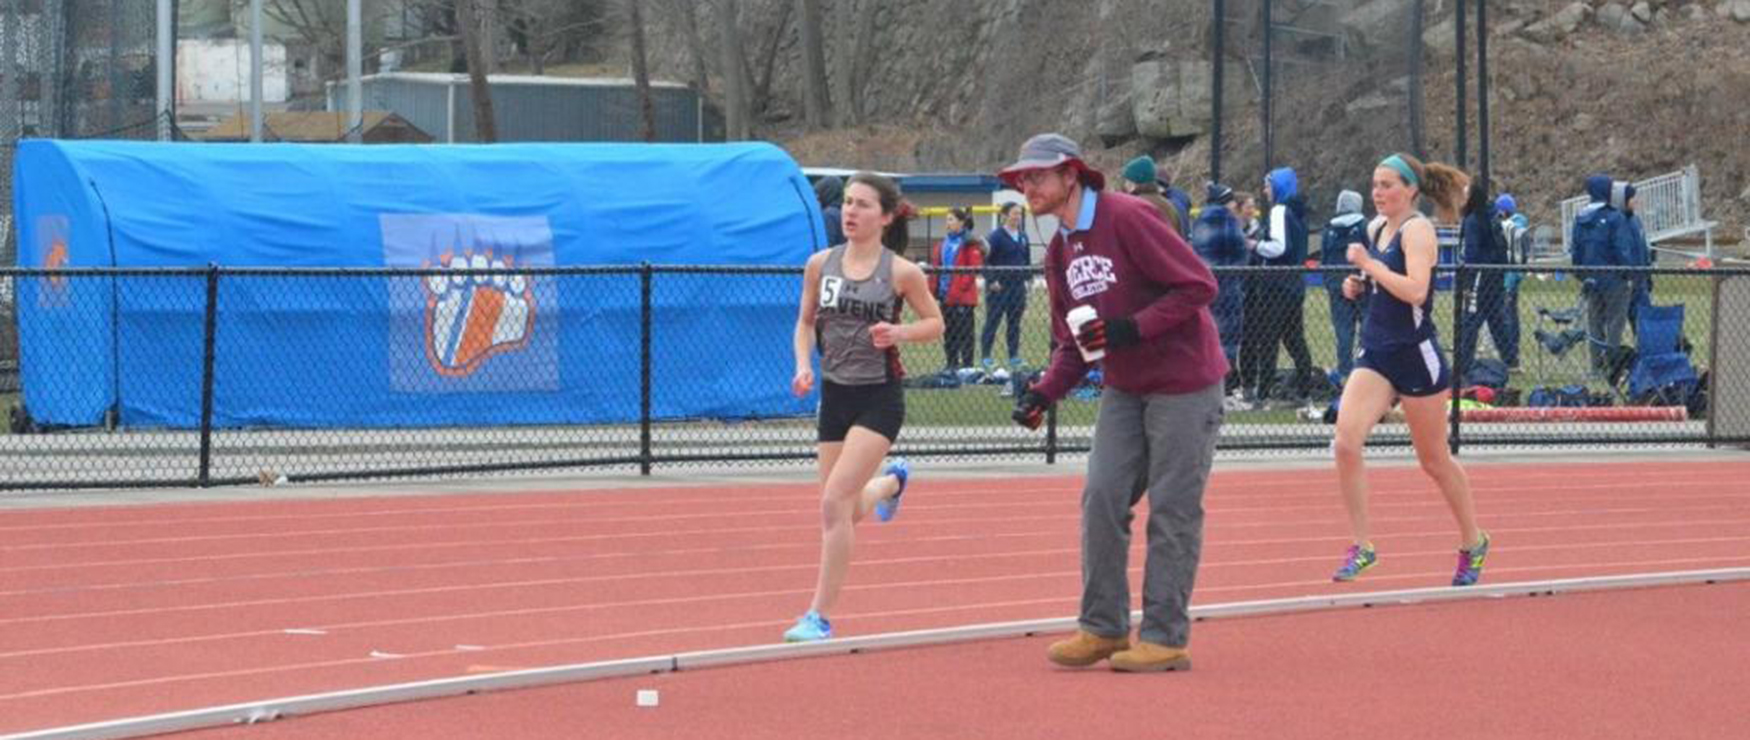 Women’s Track & Field Competes at First Day of Silfen Invitational